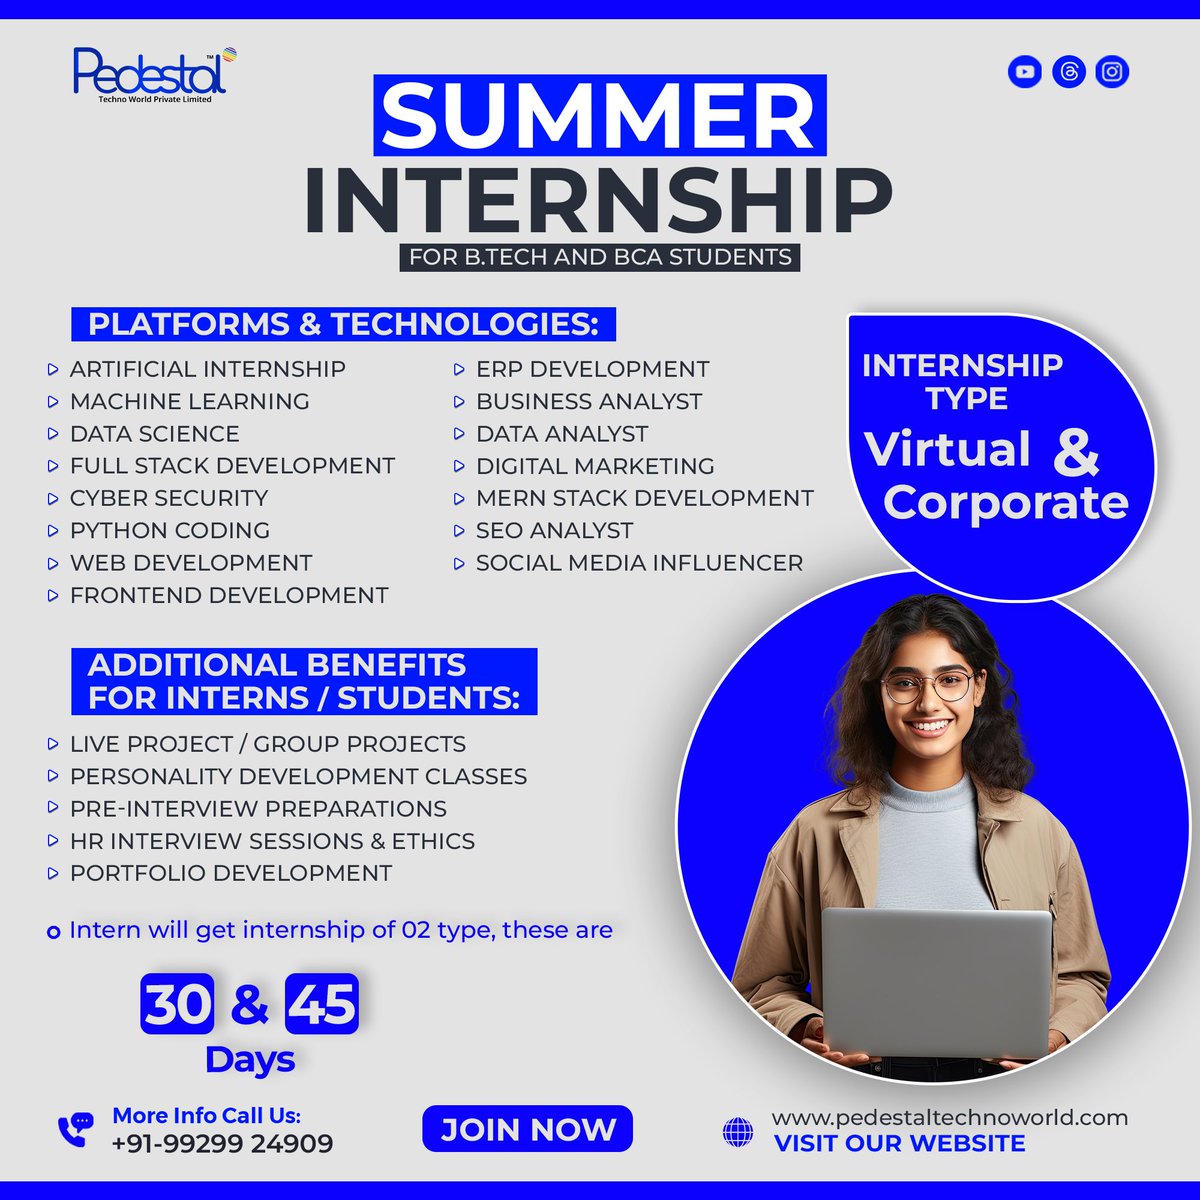 #pedestal is open for #internships now, interns can join #ArtificiallyIntelligence #machinelearning #datascience #digitalmarketing #fullstack technologies with #live projects and placement assistance.
Visit for more pedestaltechnoworld.com